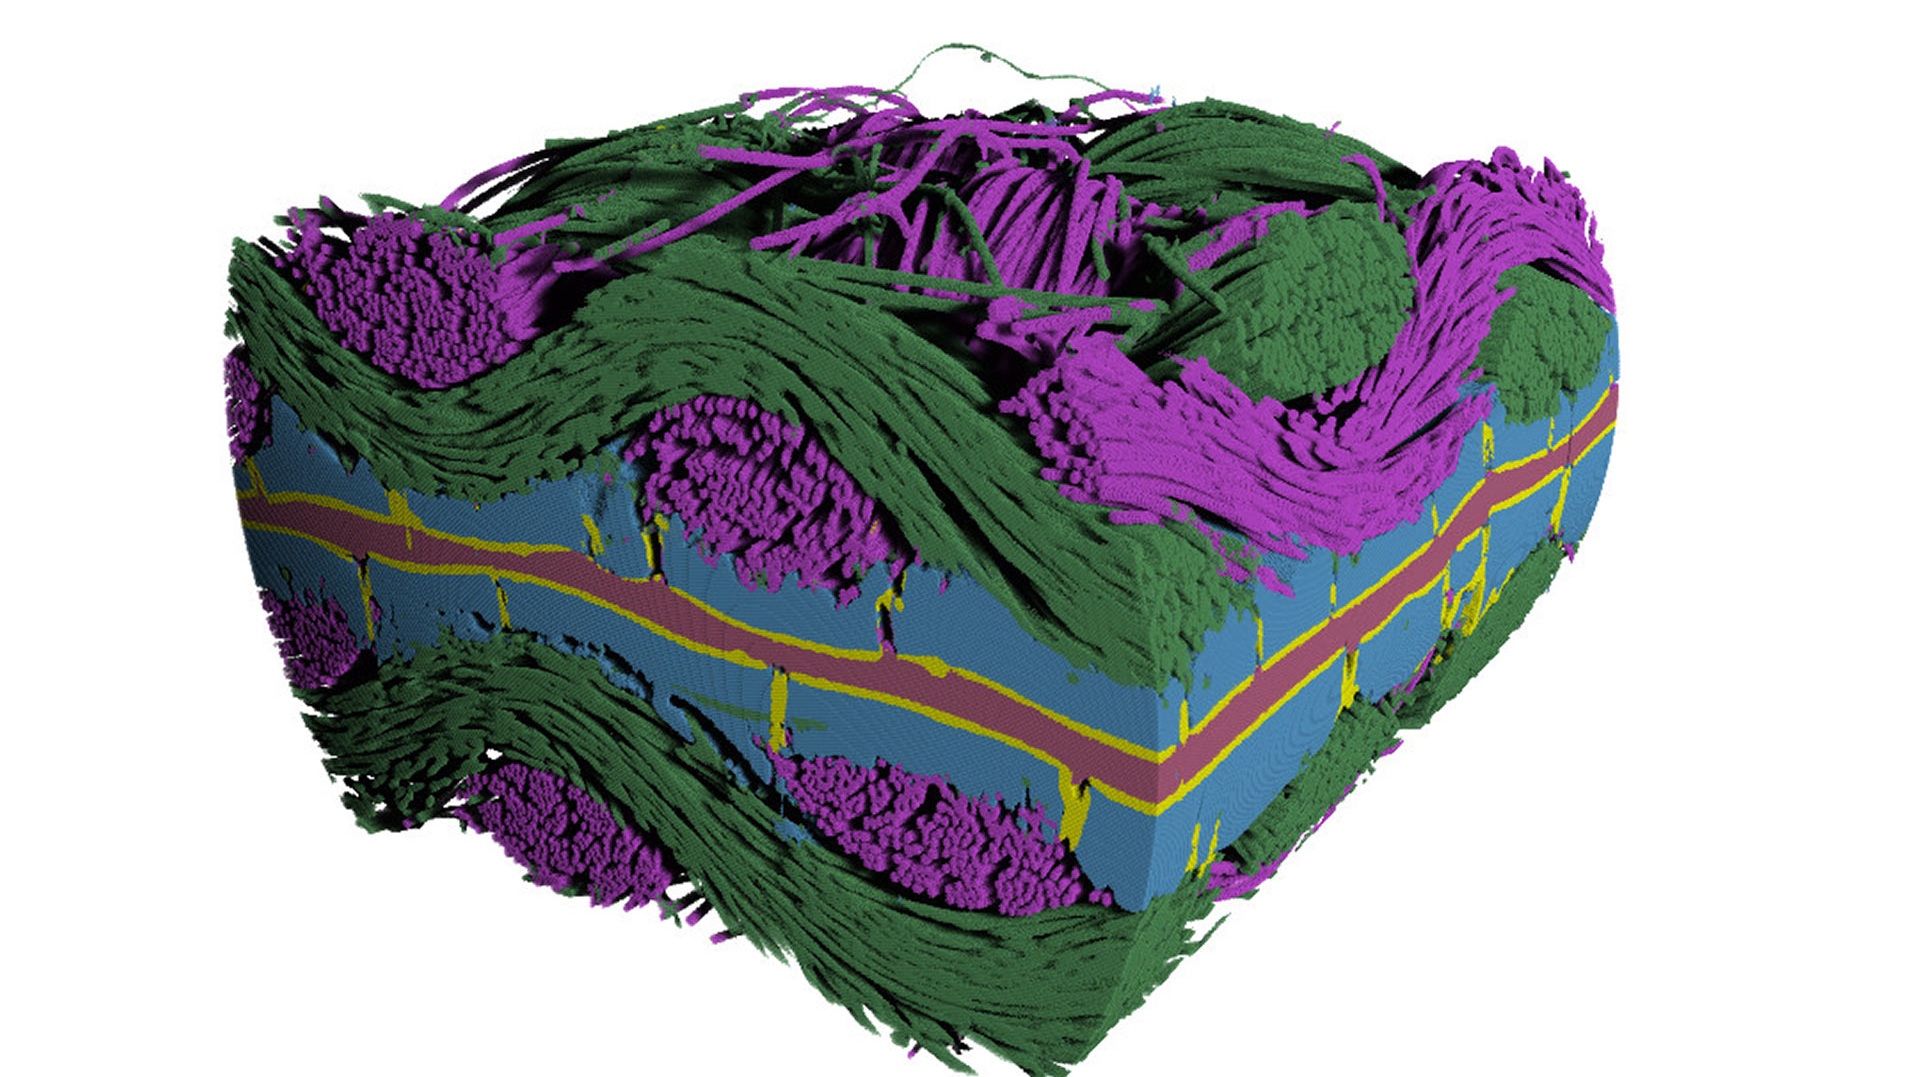 Segmented 3D volume of a polymer electrolyte fuel cell (PEFC) membrane electrode assembly. Gas diffusion layer fiber weaves are visible in green and magenta, microporous layer in blue, catalyst in yellow, and electrolyte membrane in red.